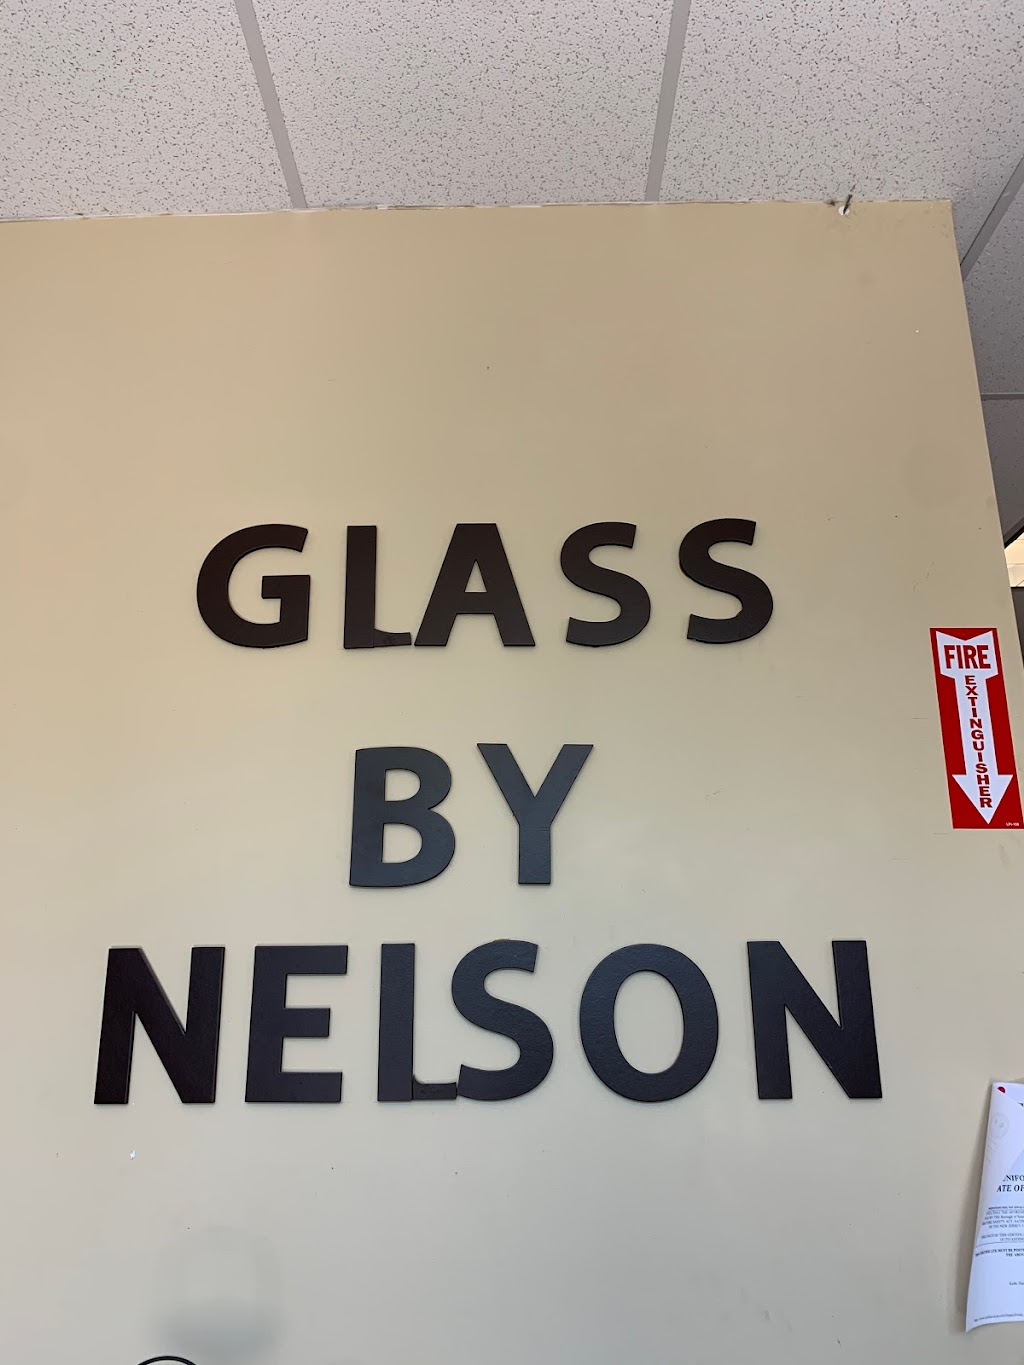 Glass by Nelson | 131 N Gaston Ave Suite 2, Somerville, NJ 08876 | Phone: (908) 393-1616